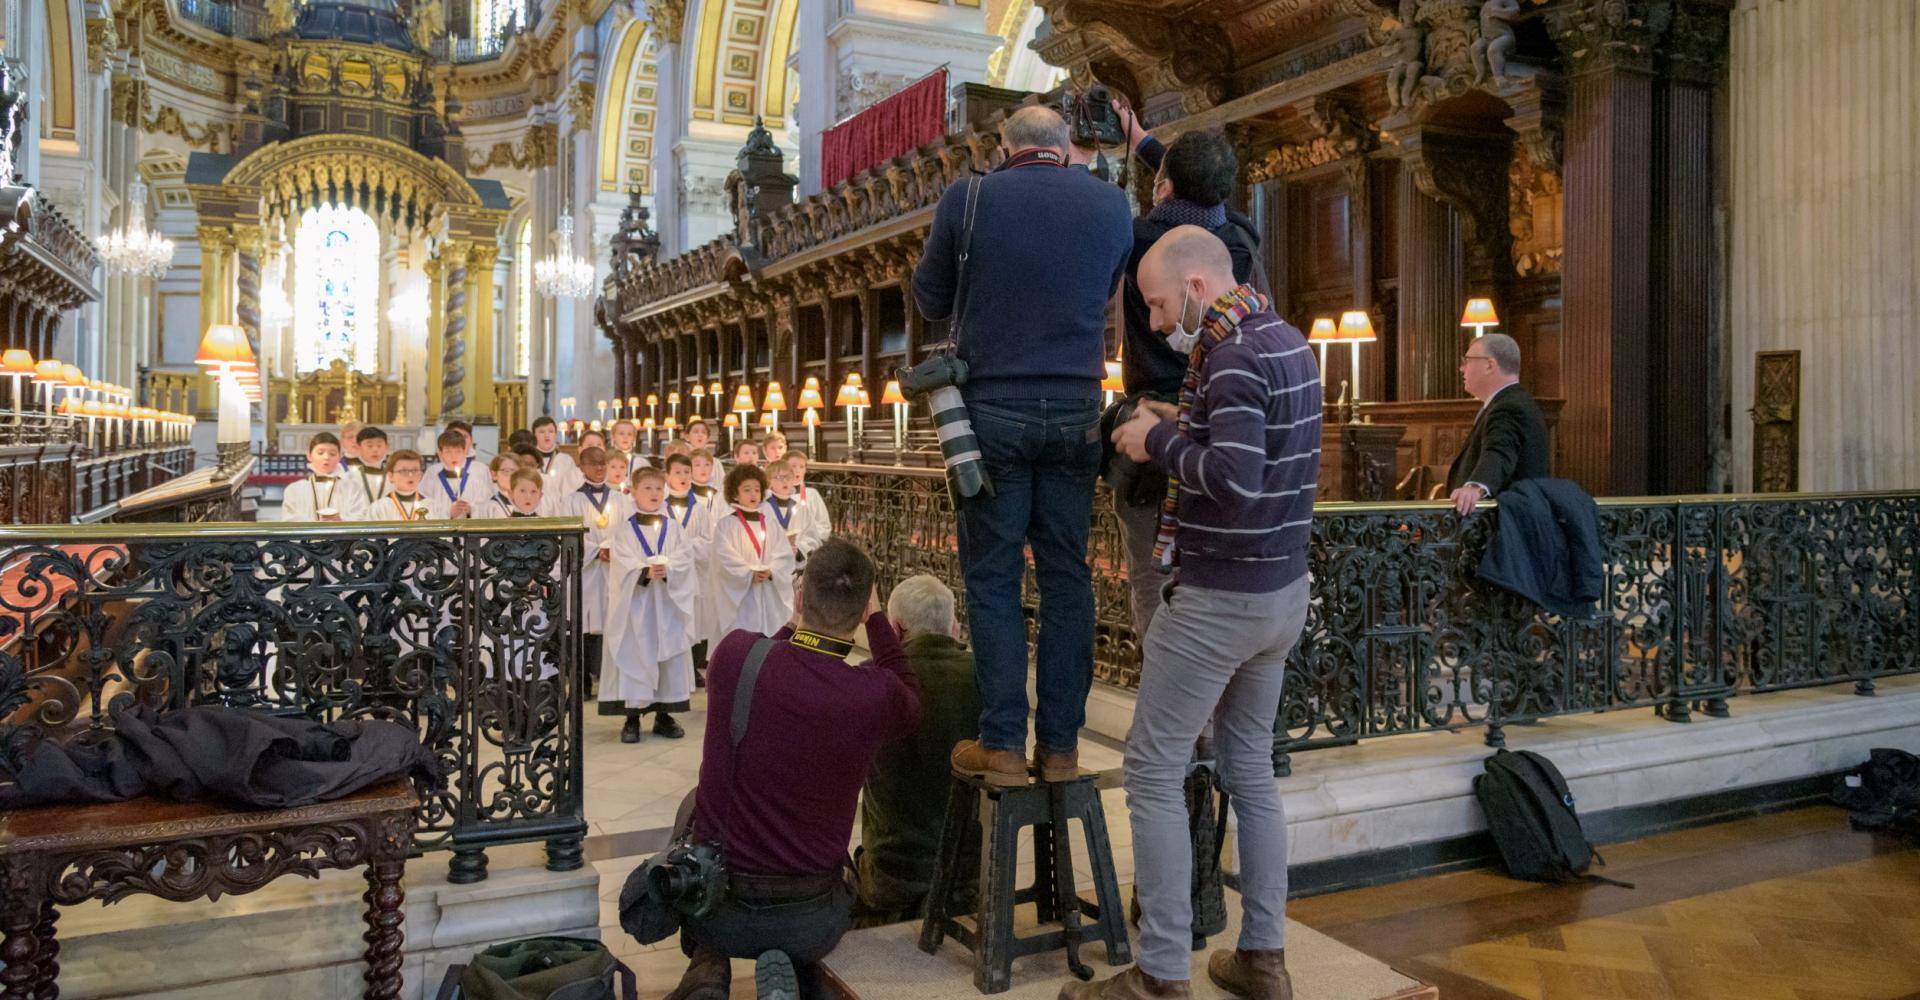 Press photographers take photos of the choristers during a media visit